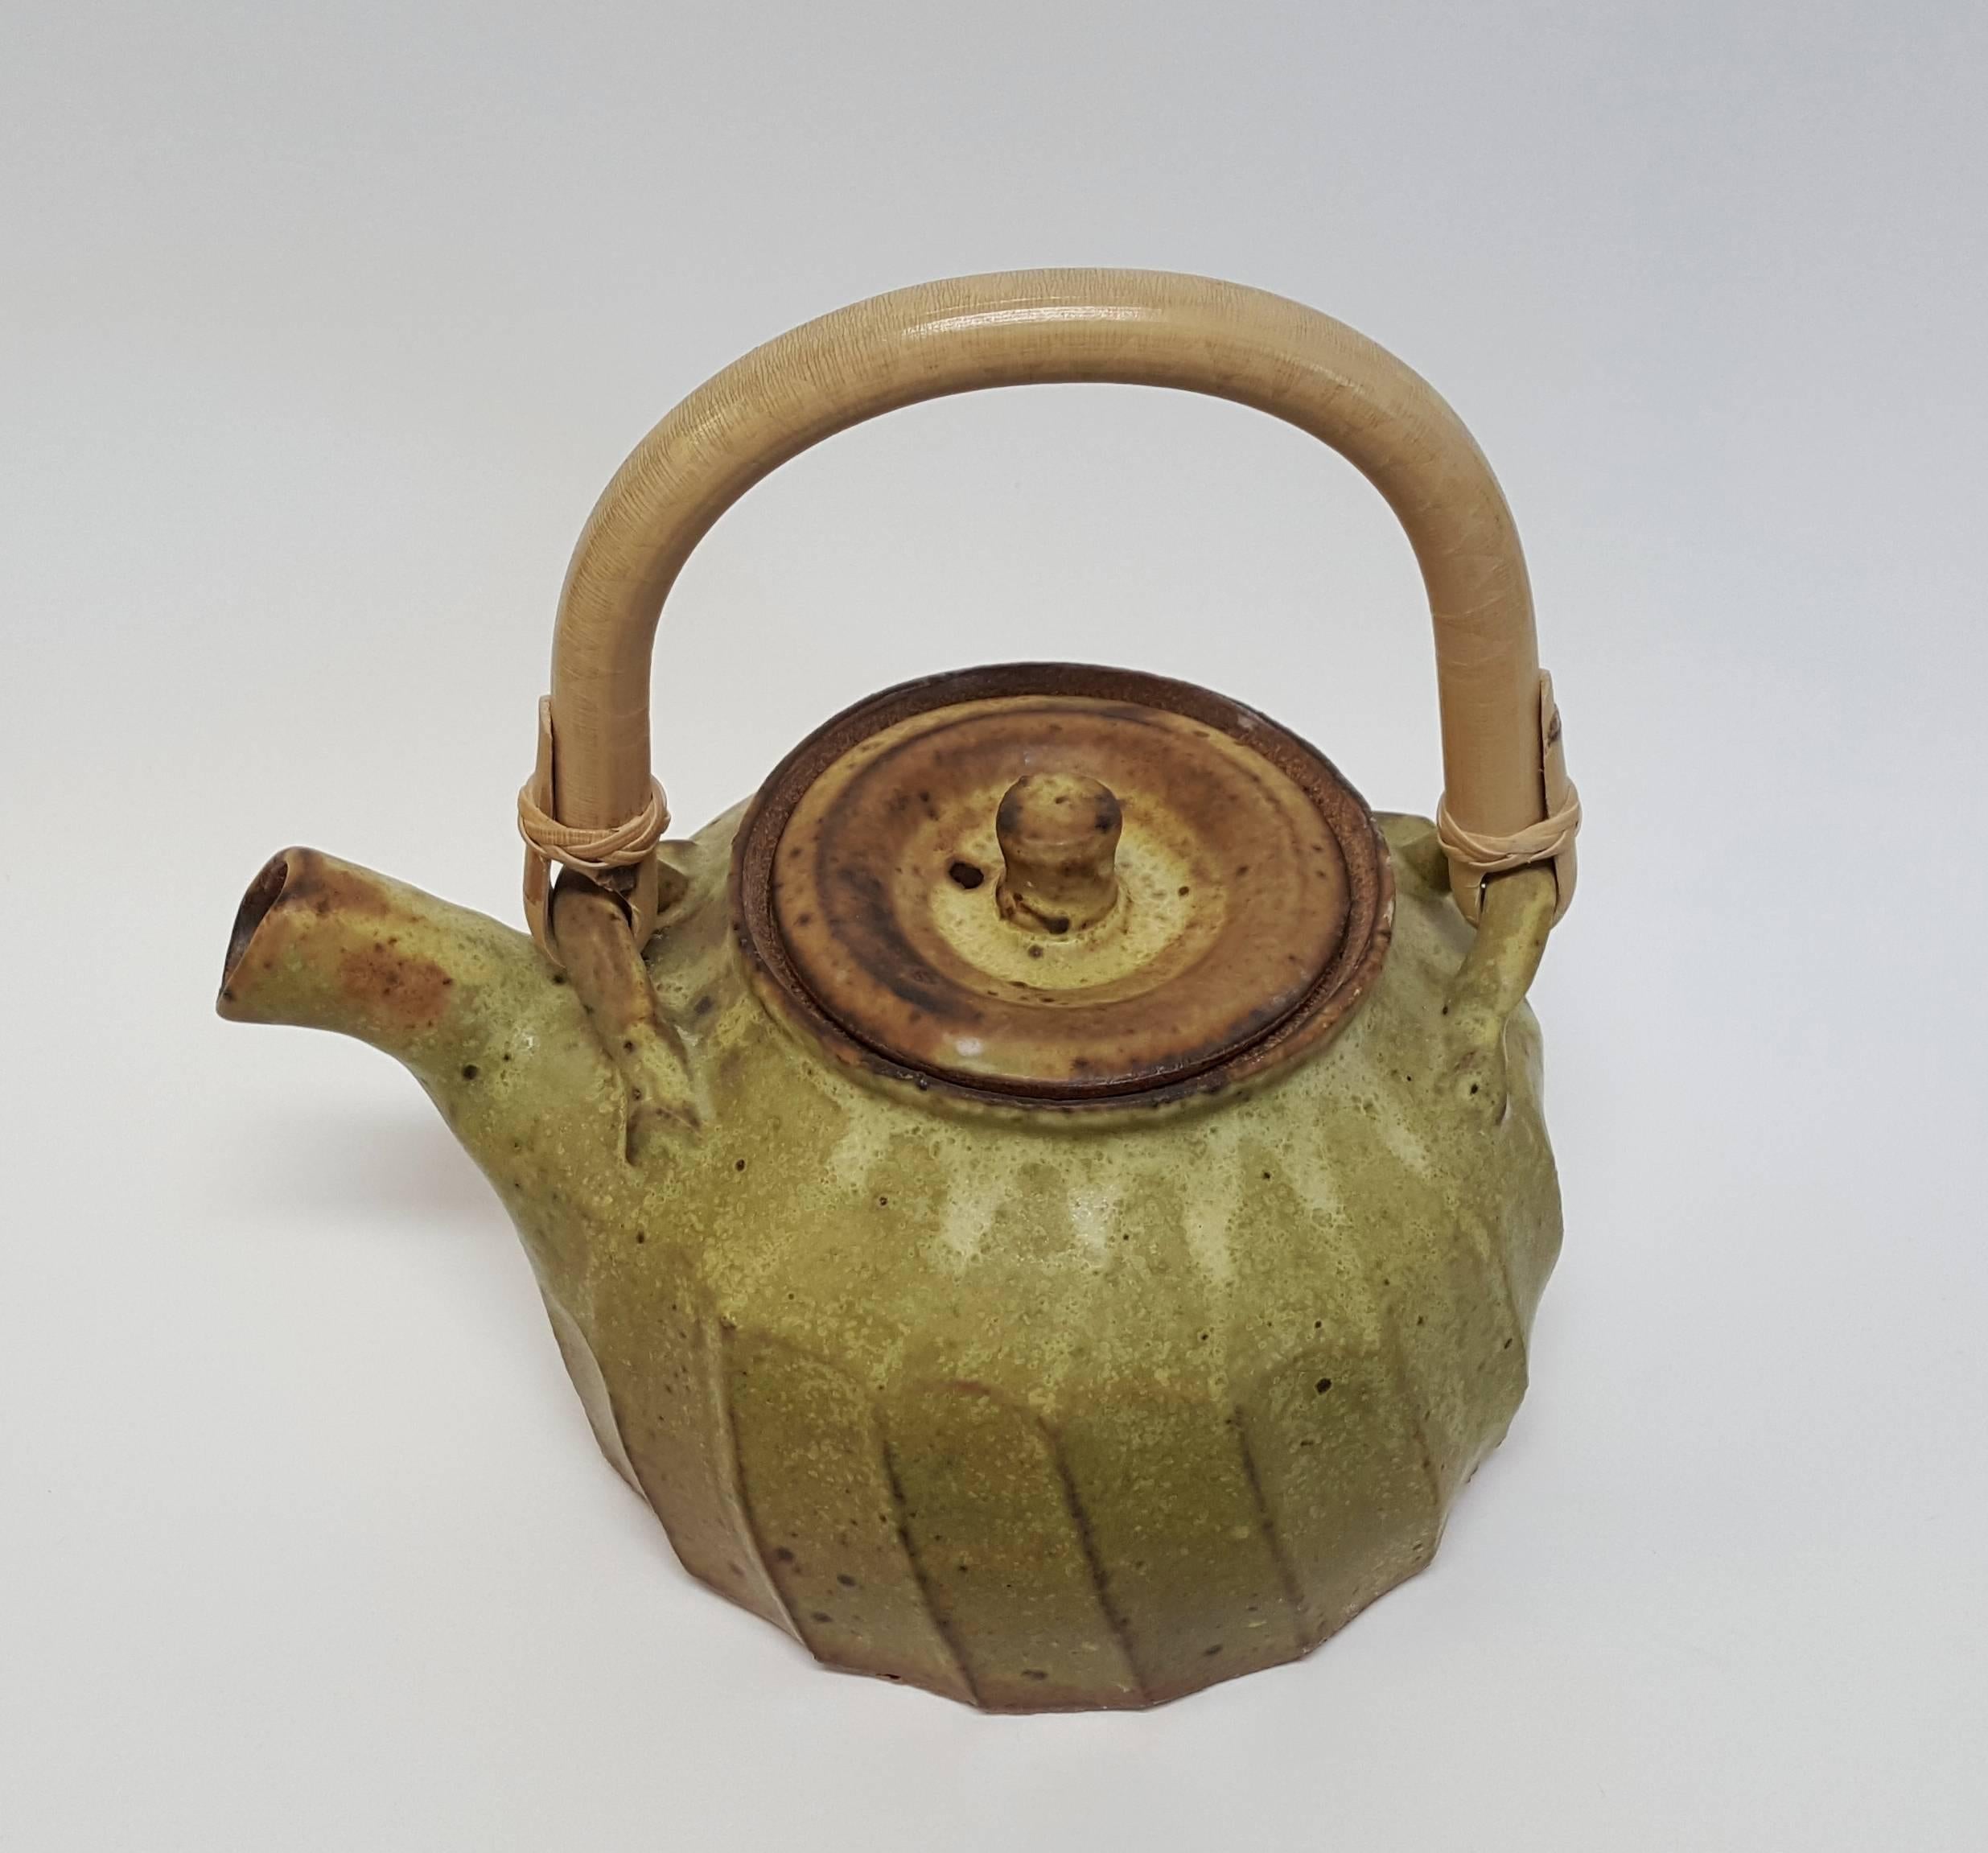 Warren Mackenzie (born 1924)
Fluted Teapot, n.d.
Stoneware
Measures: 4 x 5 inches


MacKenzie's defining moment leading to his life's work began while he was a student at The Art Institute of Chicago when he came across a simple and practical